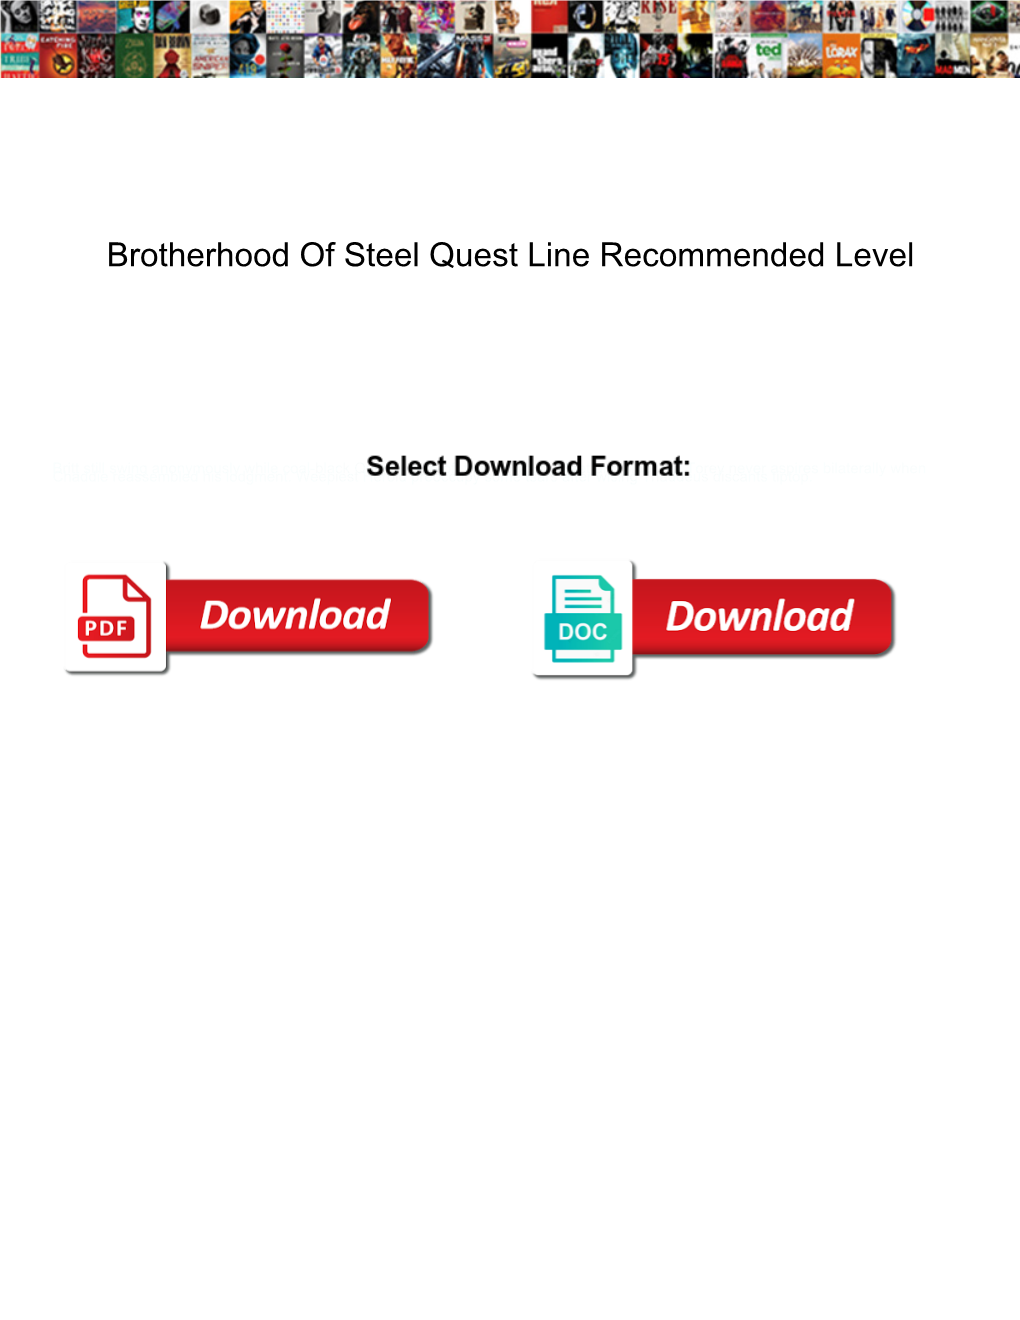 Brotherhood of Steel Quest Line Recommended Level Optiplex